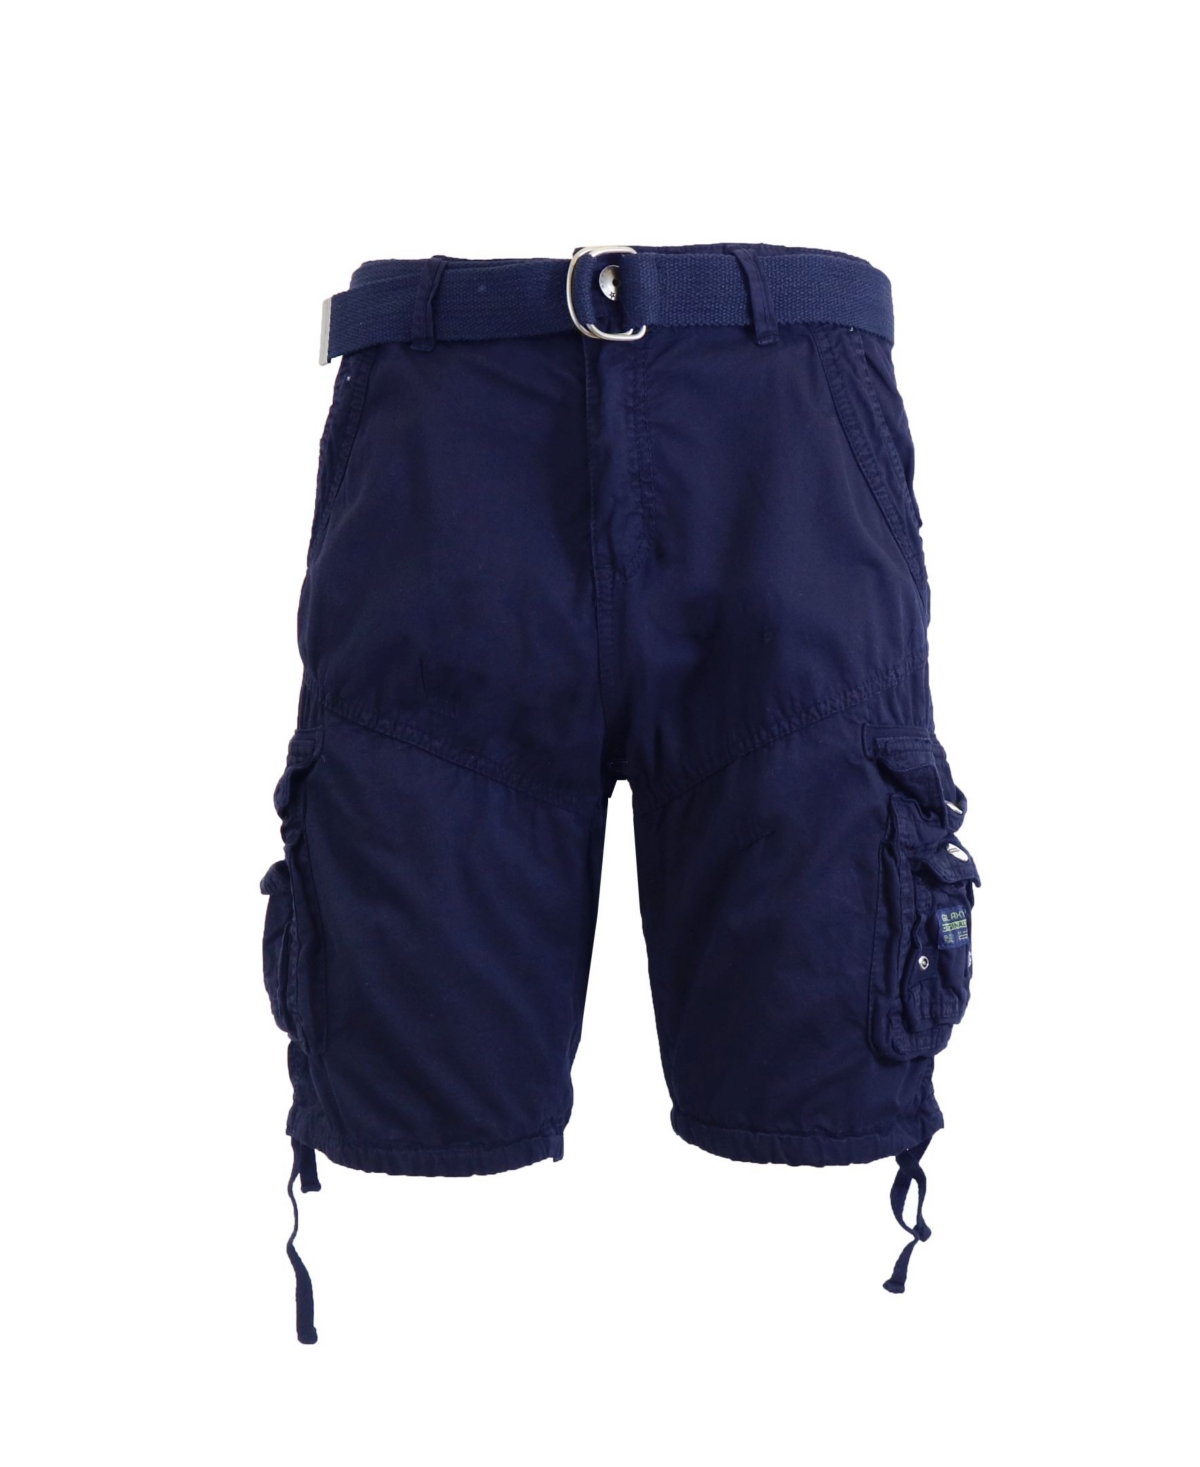 Men's Belted Cargo Shorts with Twill Flat Front Washed Utility Pockets - Stone